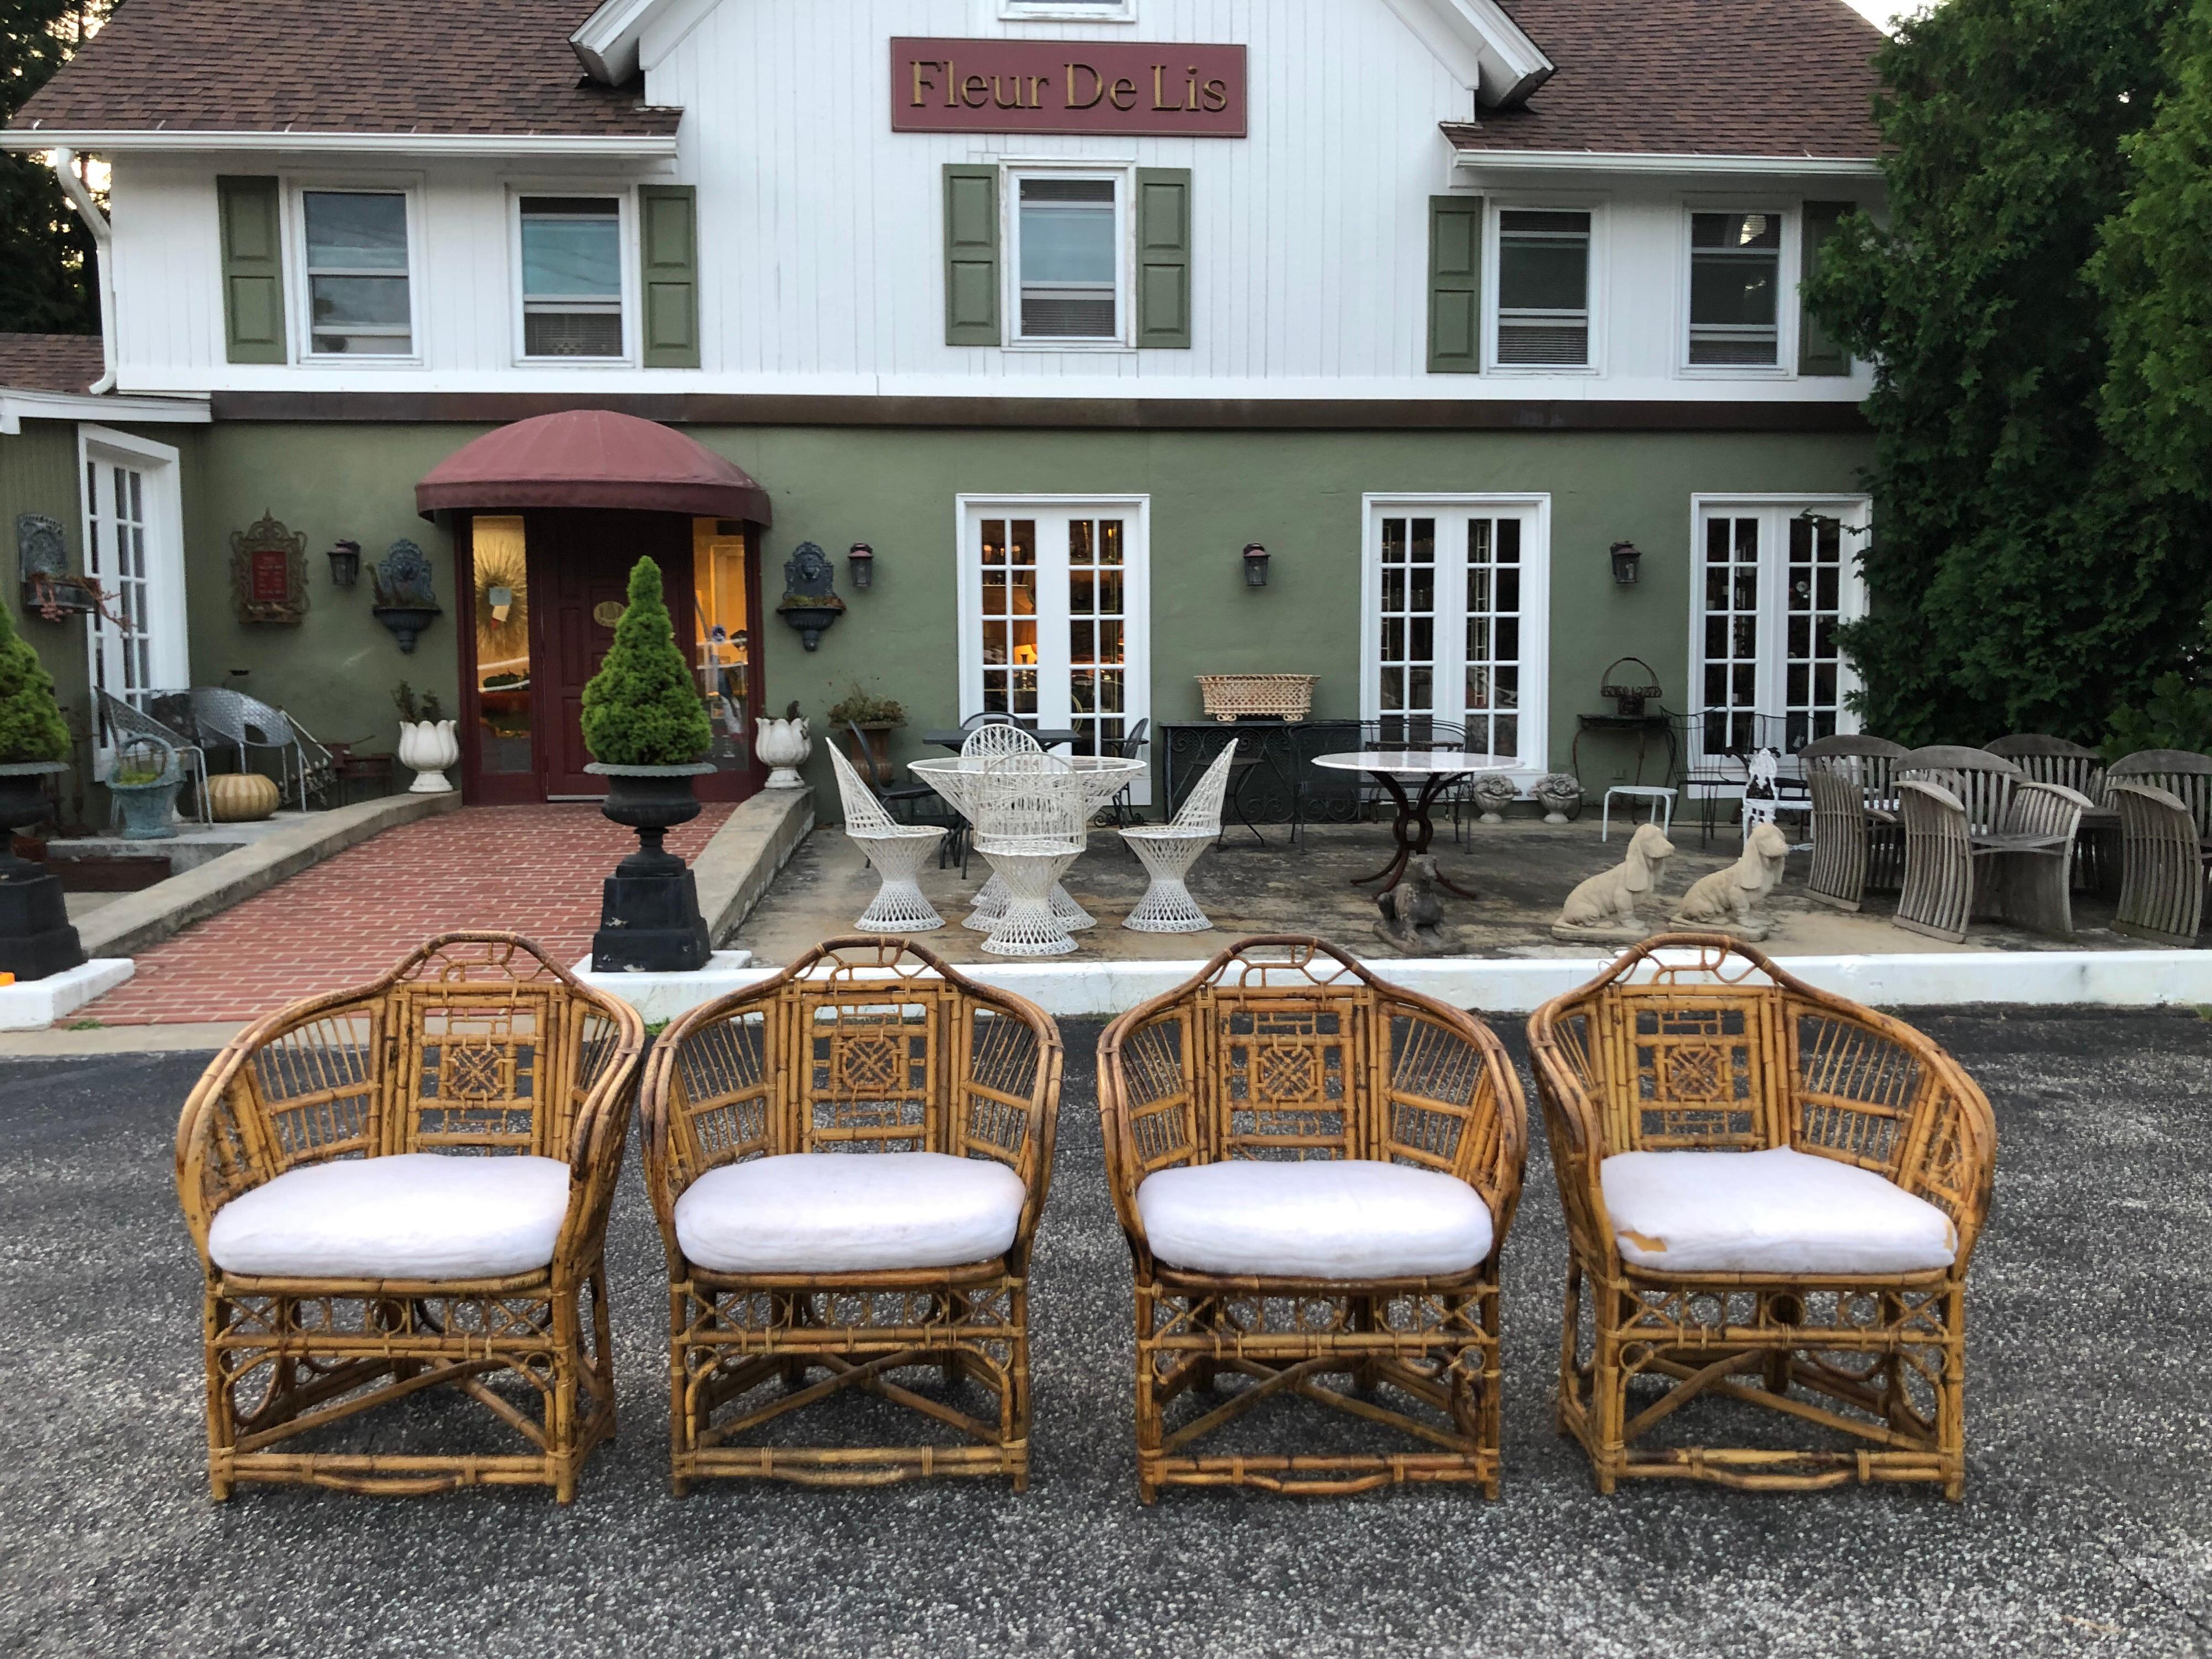 Set of four Chinese Chippendale bamboo chairs with cushion pads. Airy tropical island look. Perfect for an indoor porch sun room or breakfast nook. Custom pads need to be recovered. Seat depth is 18.50